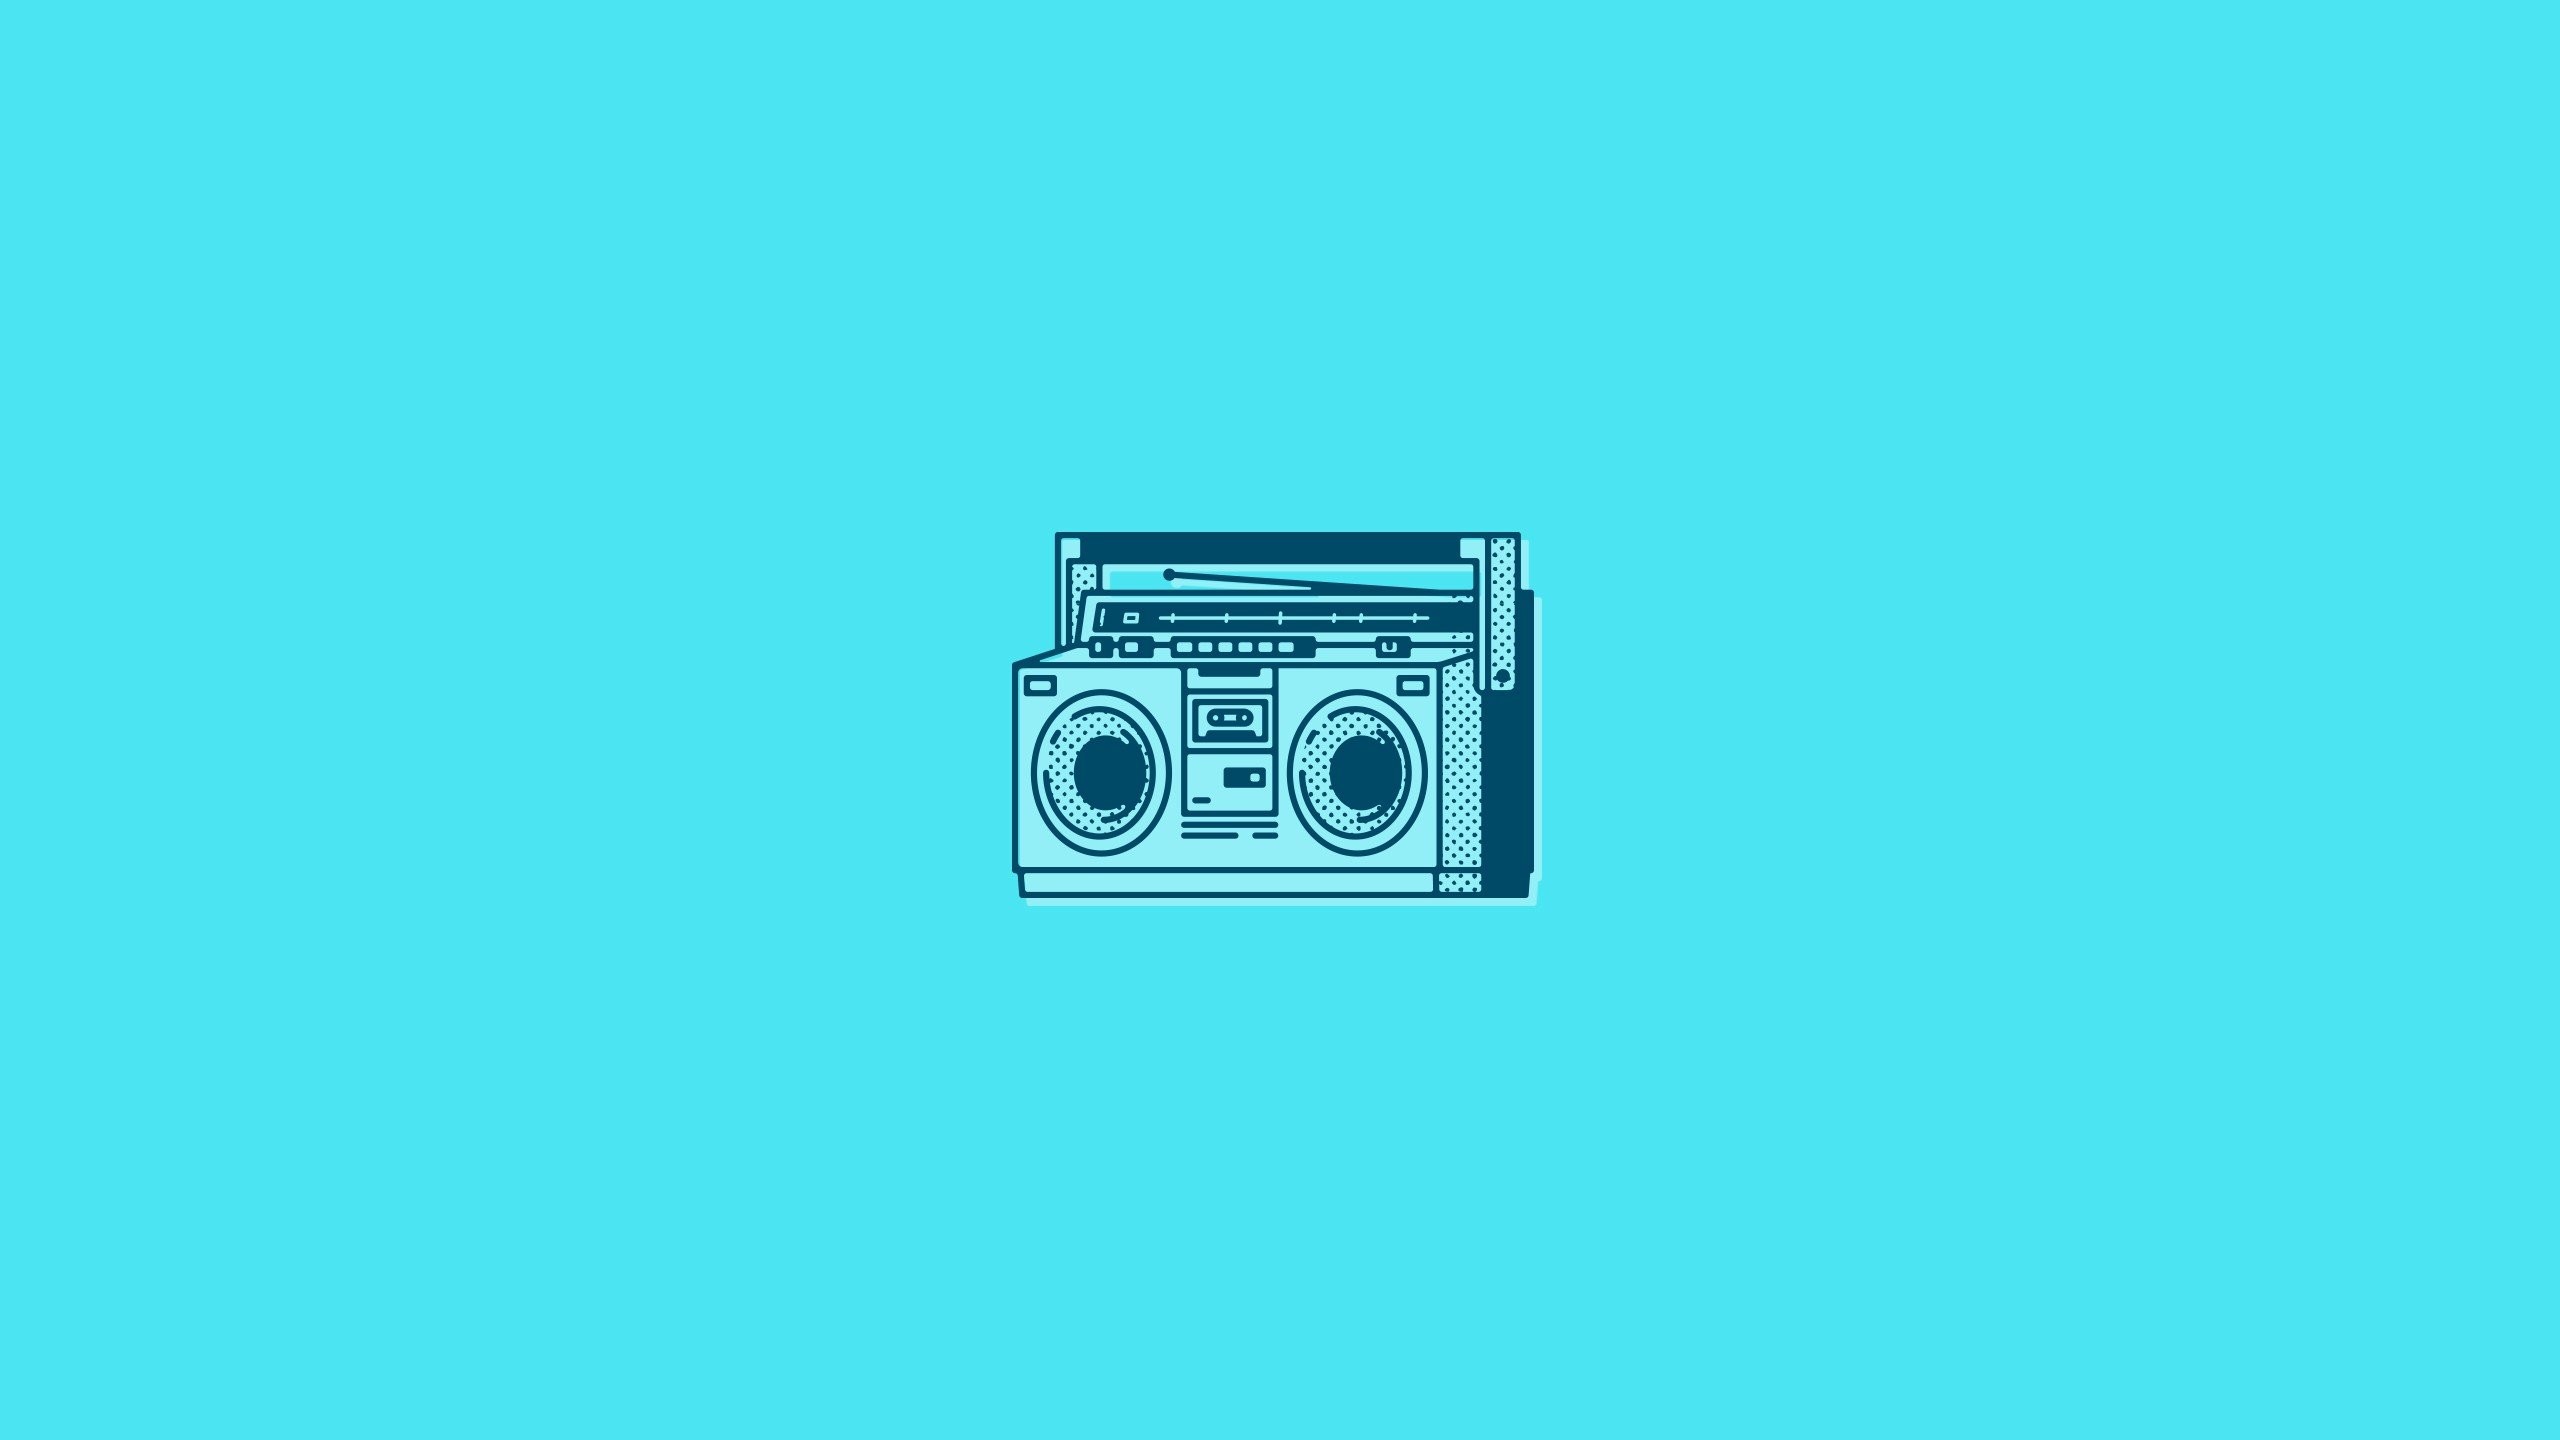 2560x1440 boombox, Stereos, Speakers, Music, Blue background, Minimalism,  Illustration, Radio, Antenna Wallpapers HD / Desktop and Mobile Backgrounds